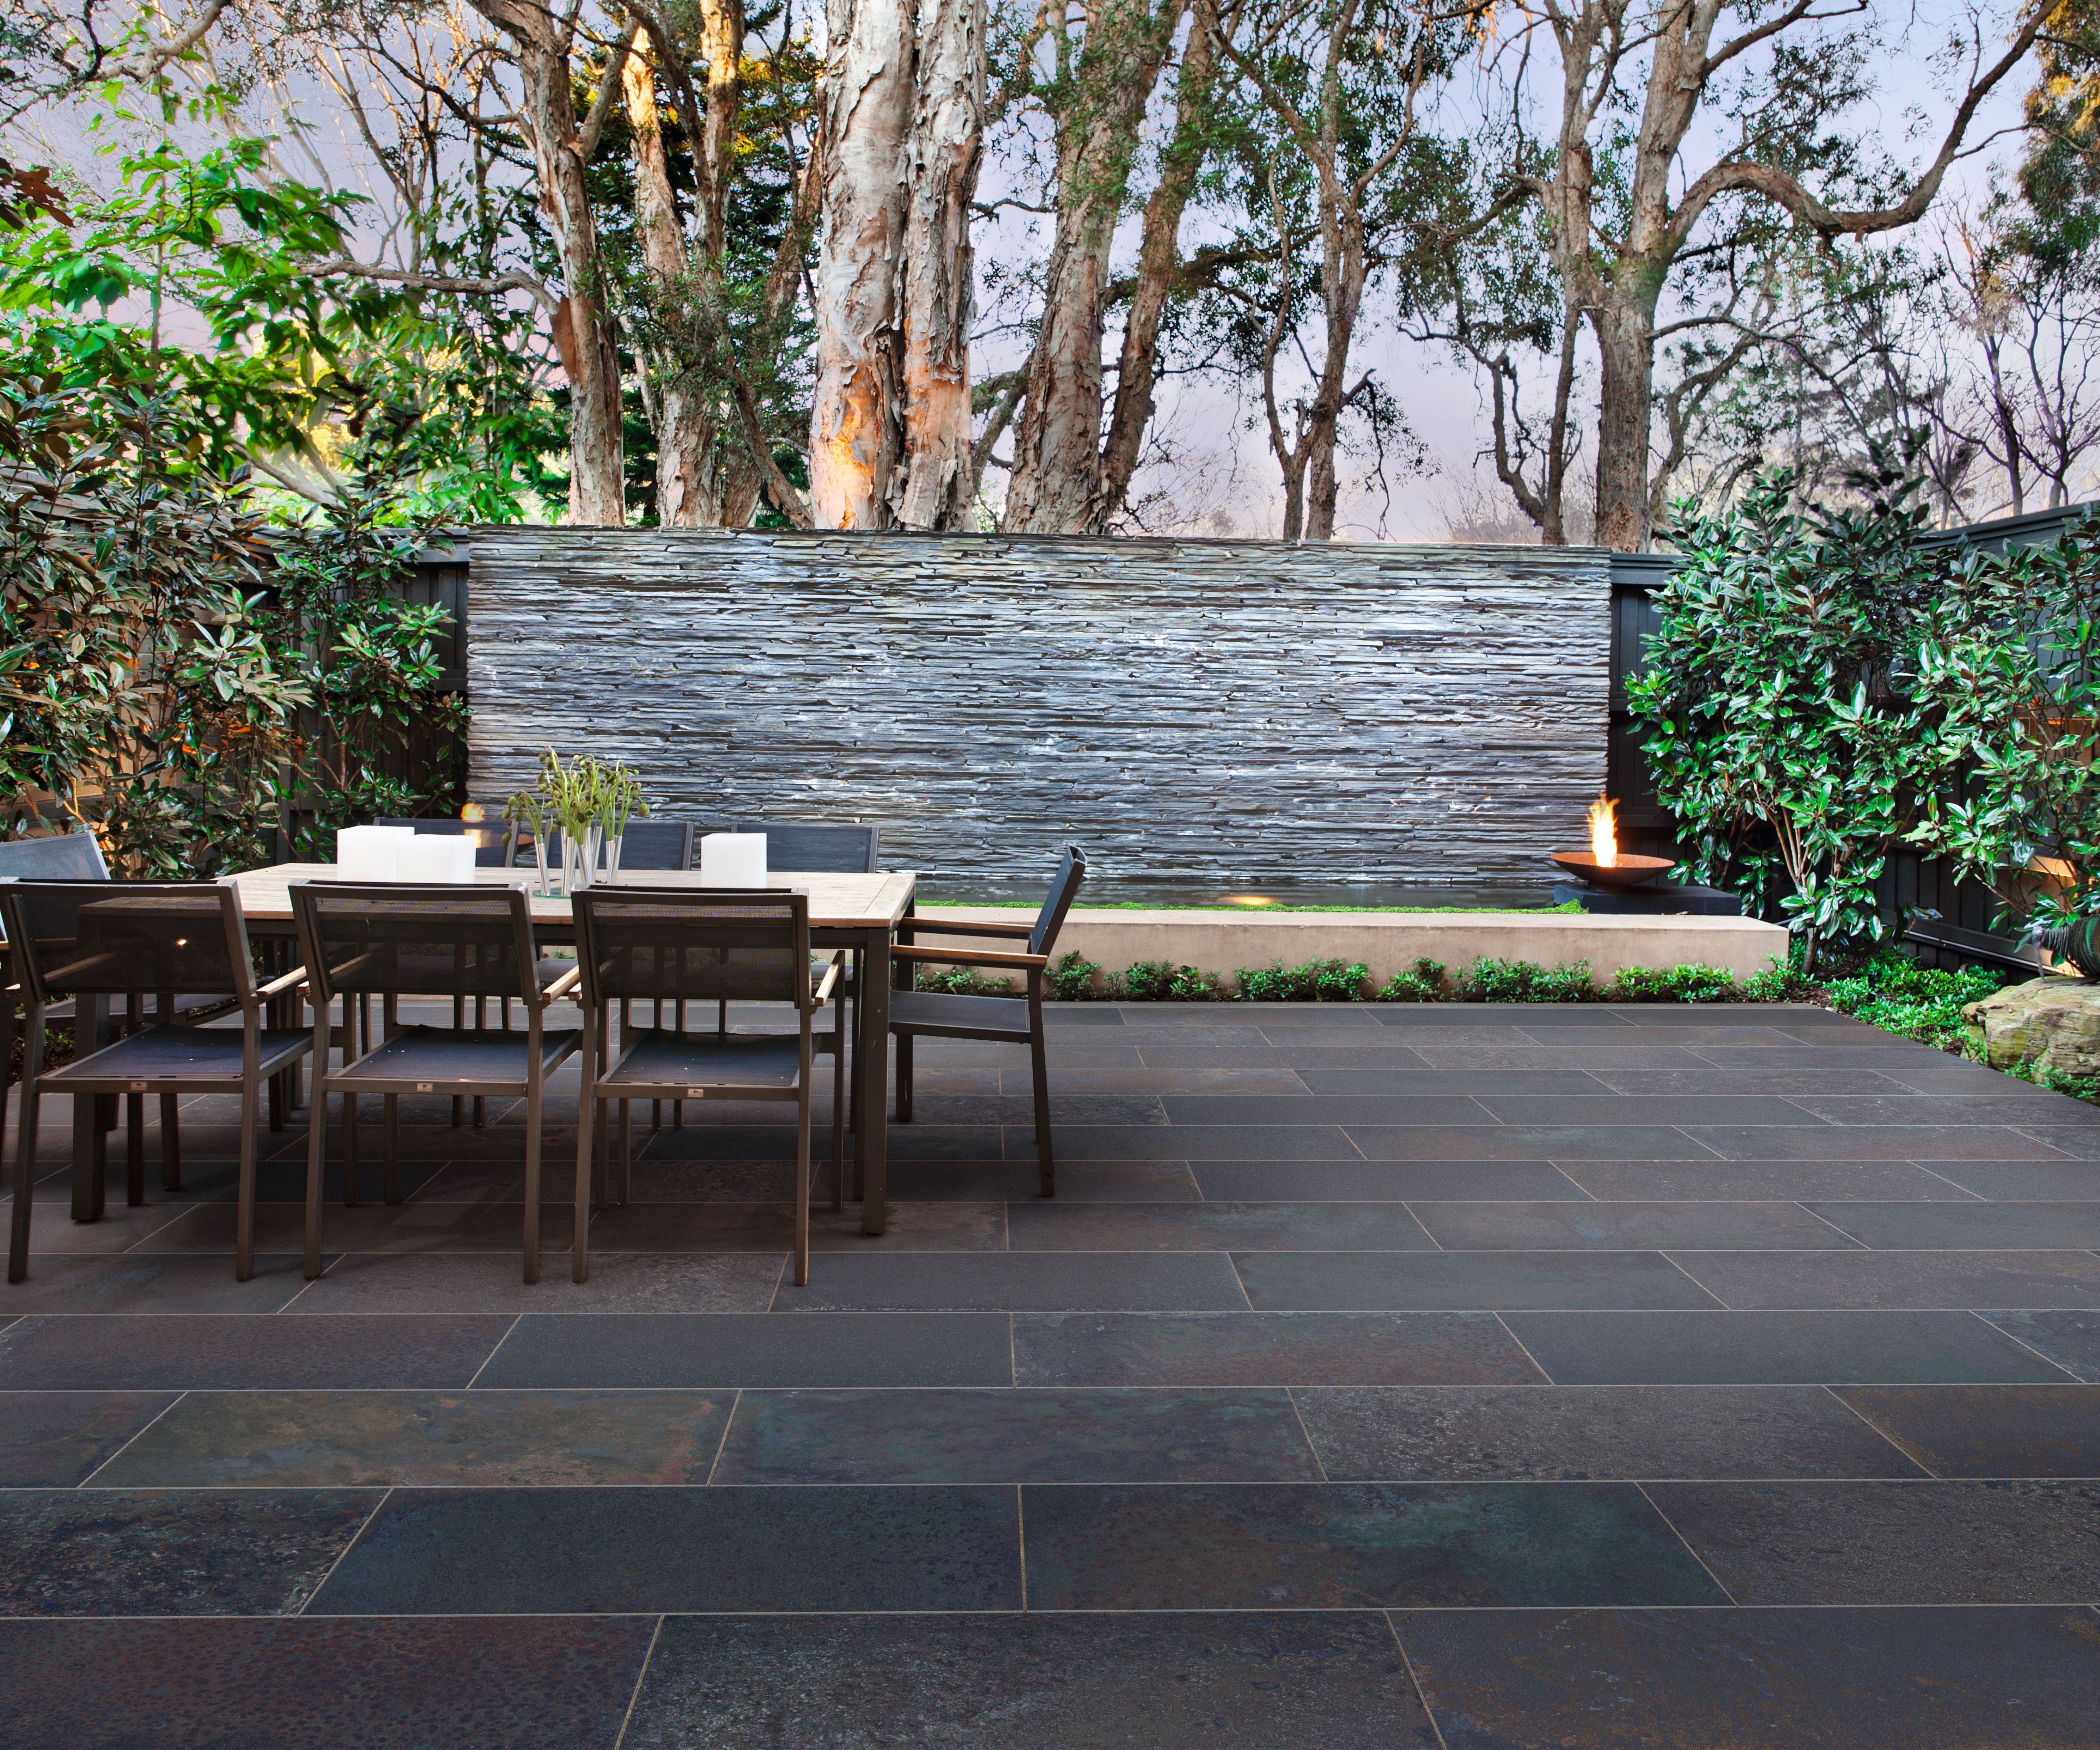 A dark-tiled patio with a table and chairs in front of a water feature